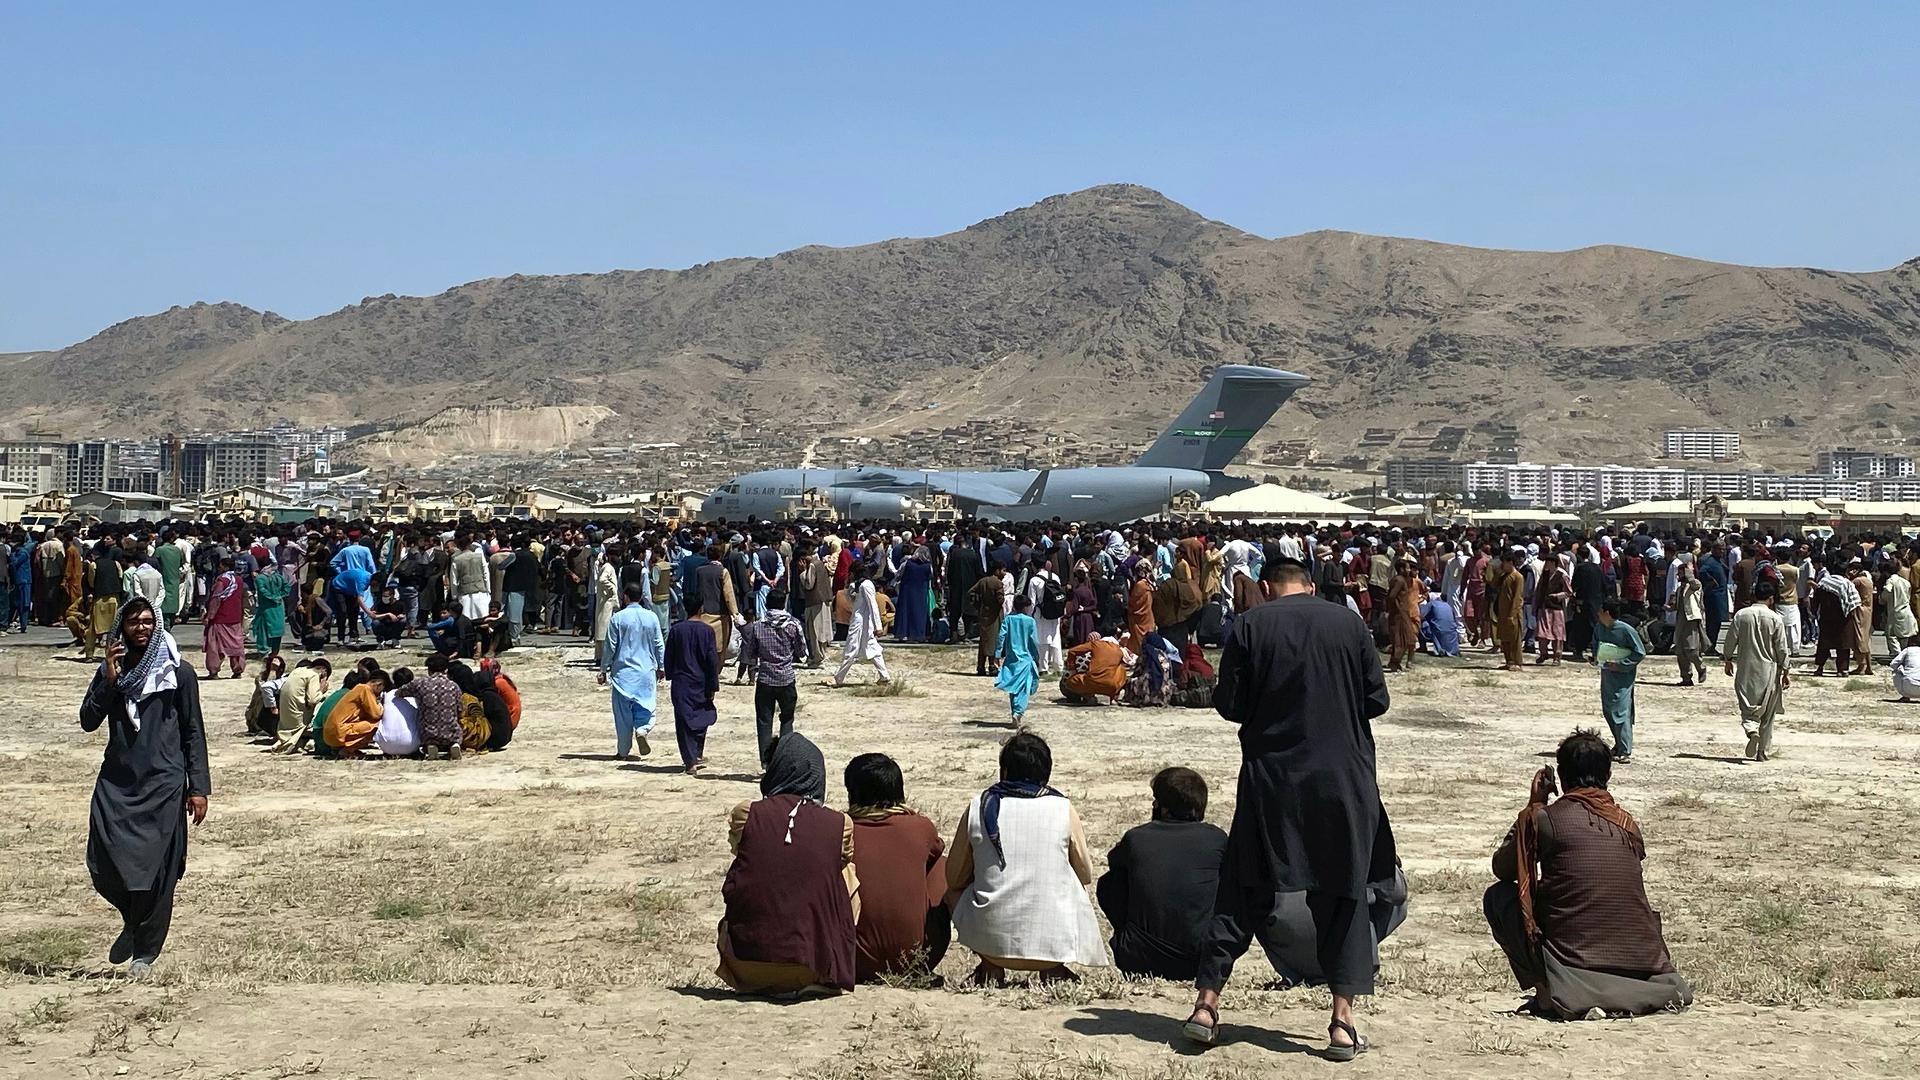 Hundreds of people gather near a US Air Force C-17 transport plane at the perimeter of the international airport in Kabul, Afghanistan, Aug. 16, 2021.